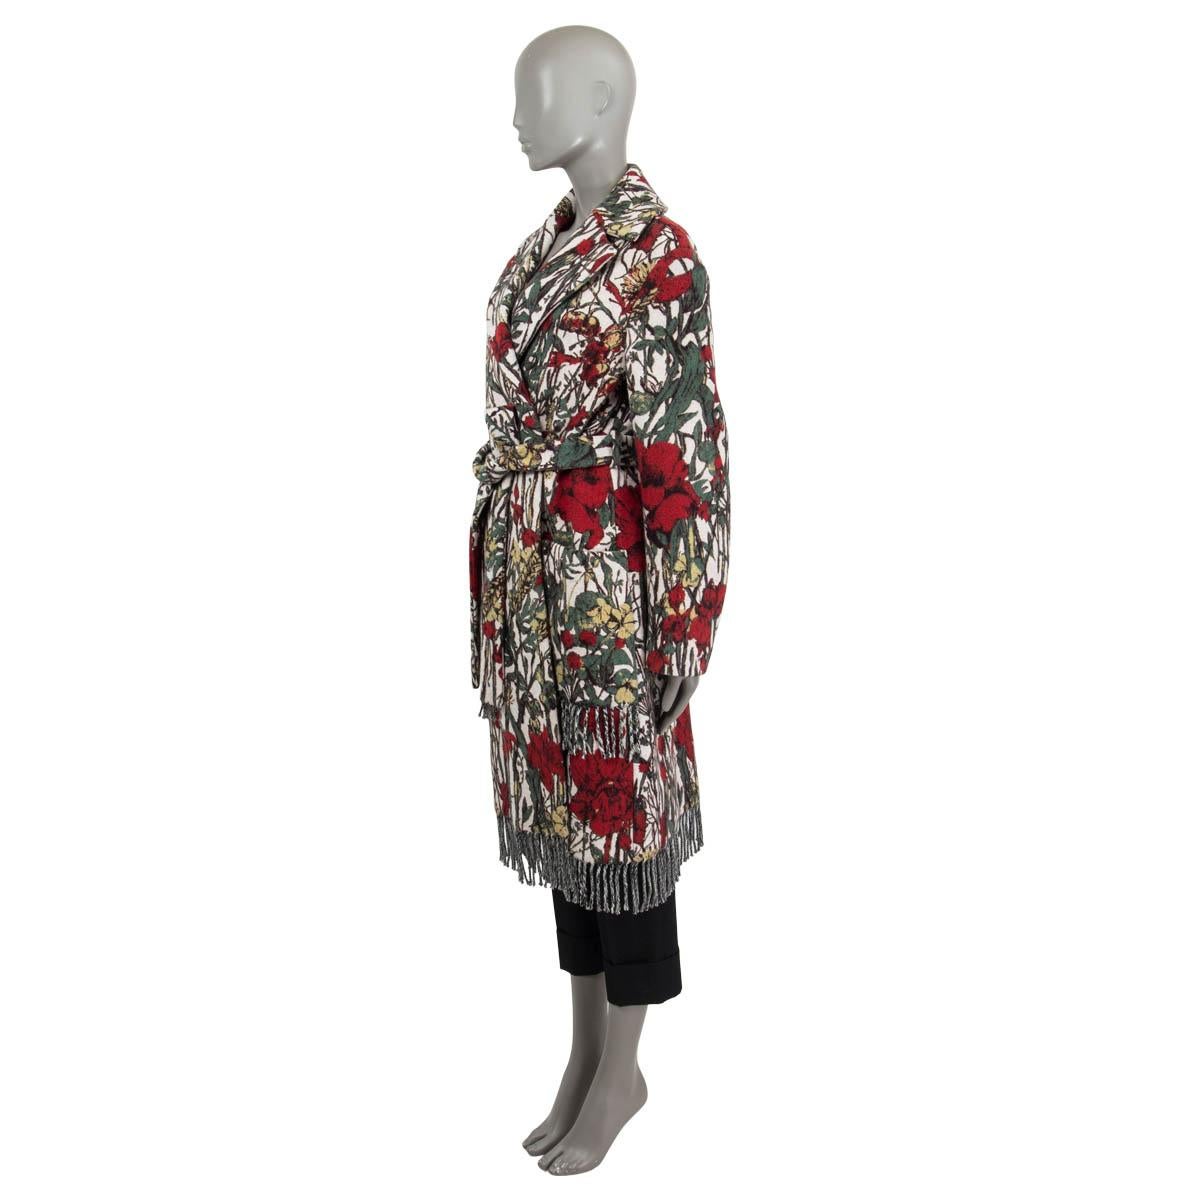 100% authentic Christian Dior floral fringed knit coat in red, green and light gray wool (100%). Features a detachable belt, belt loops and two patch pockets on the front. Unlined. Has been worn once or twice and is in virtually new condition.

2021